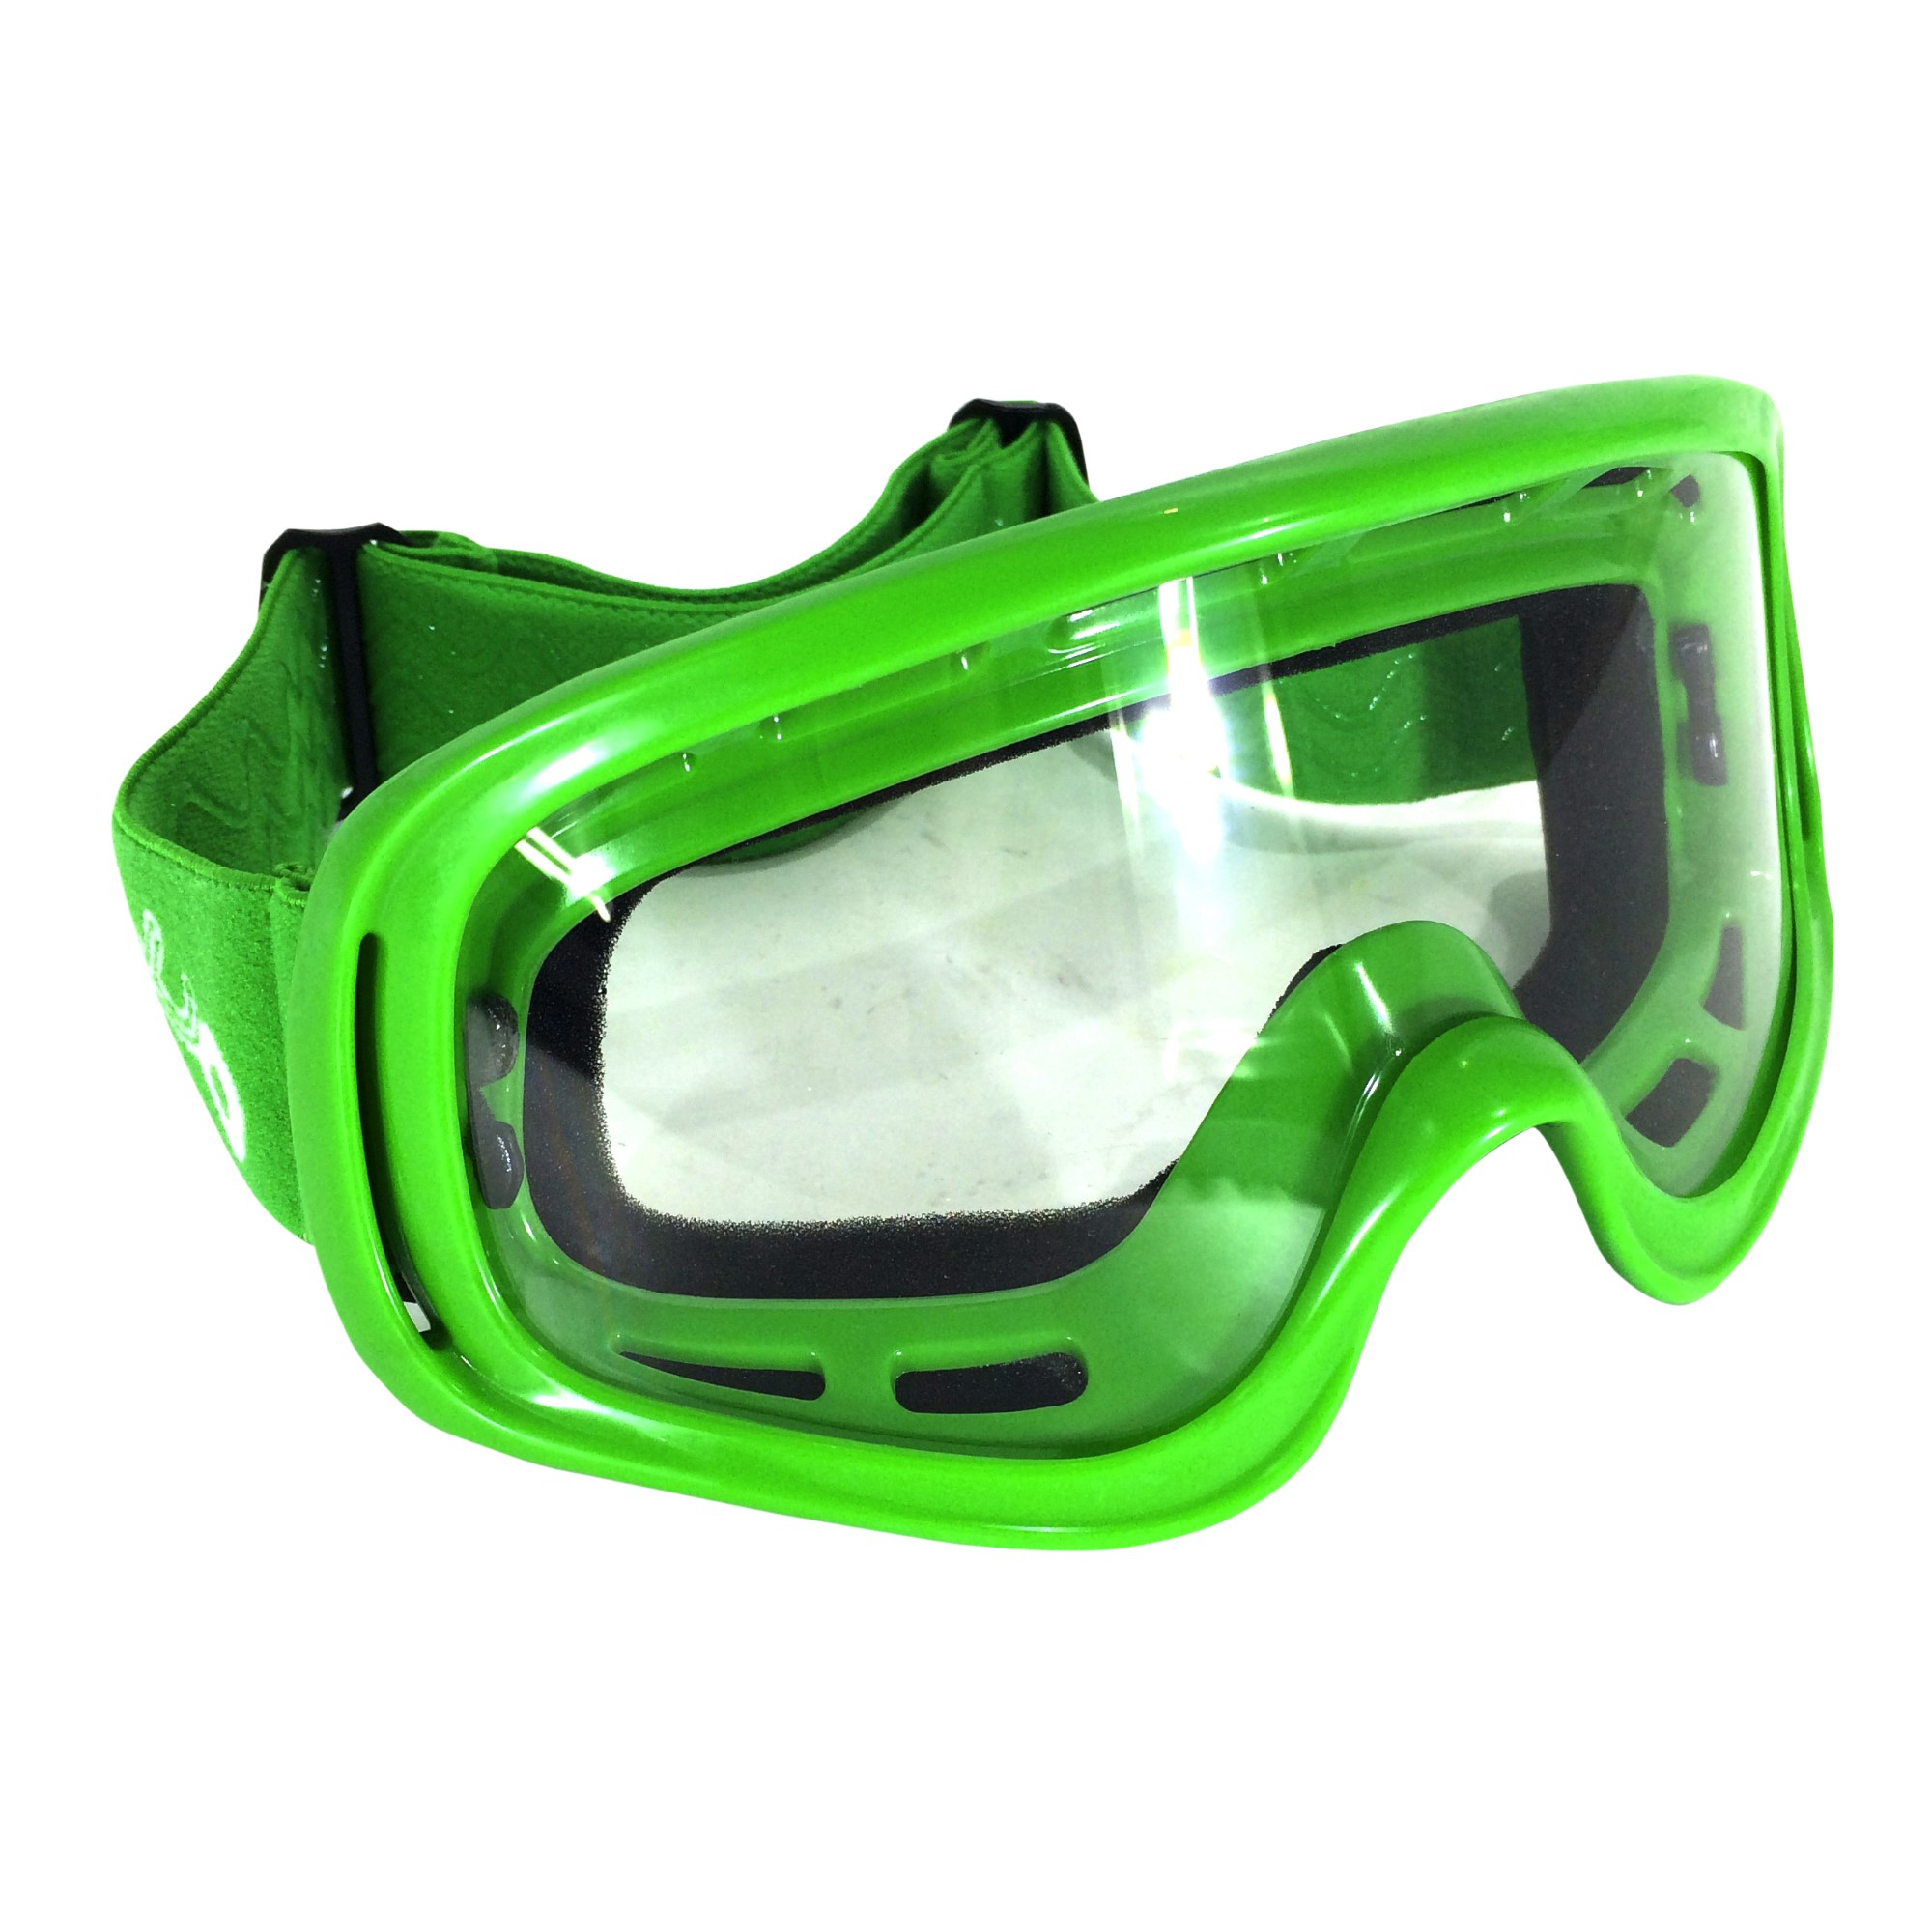 X1 ADULT GOGGLE IN DIFFERENT COLORS